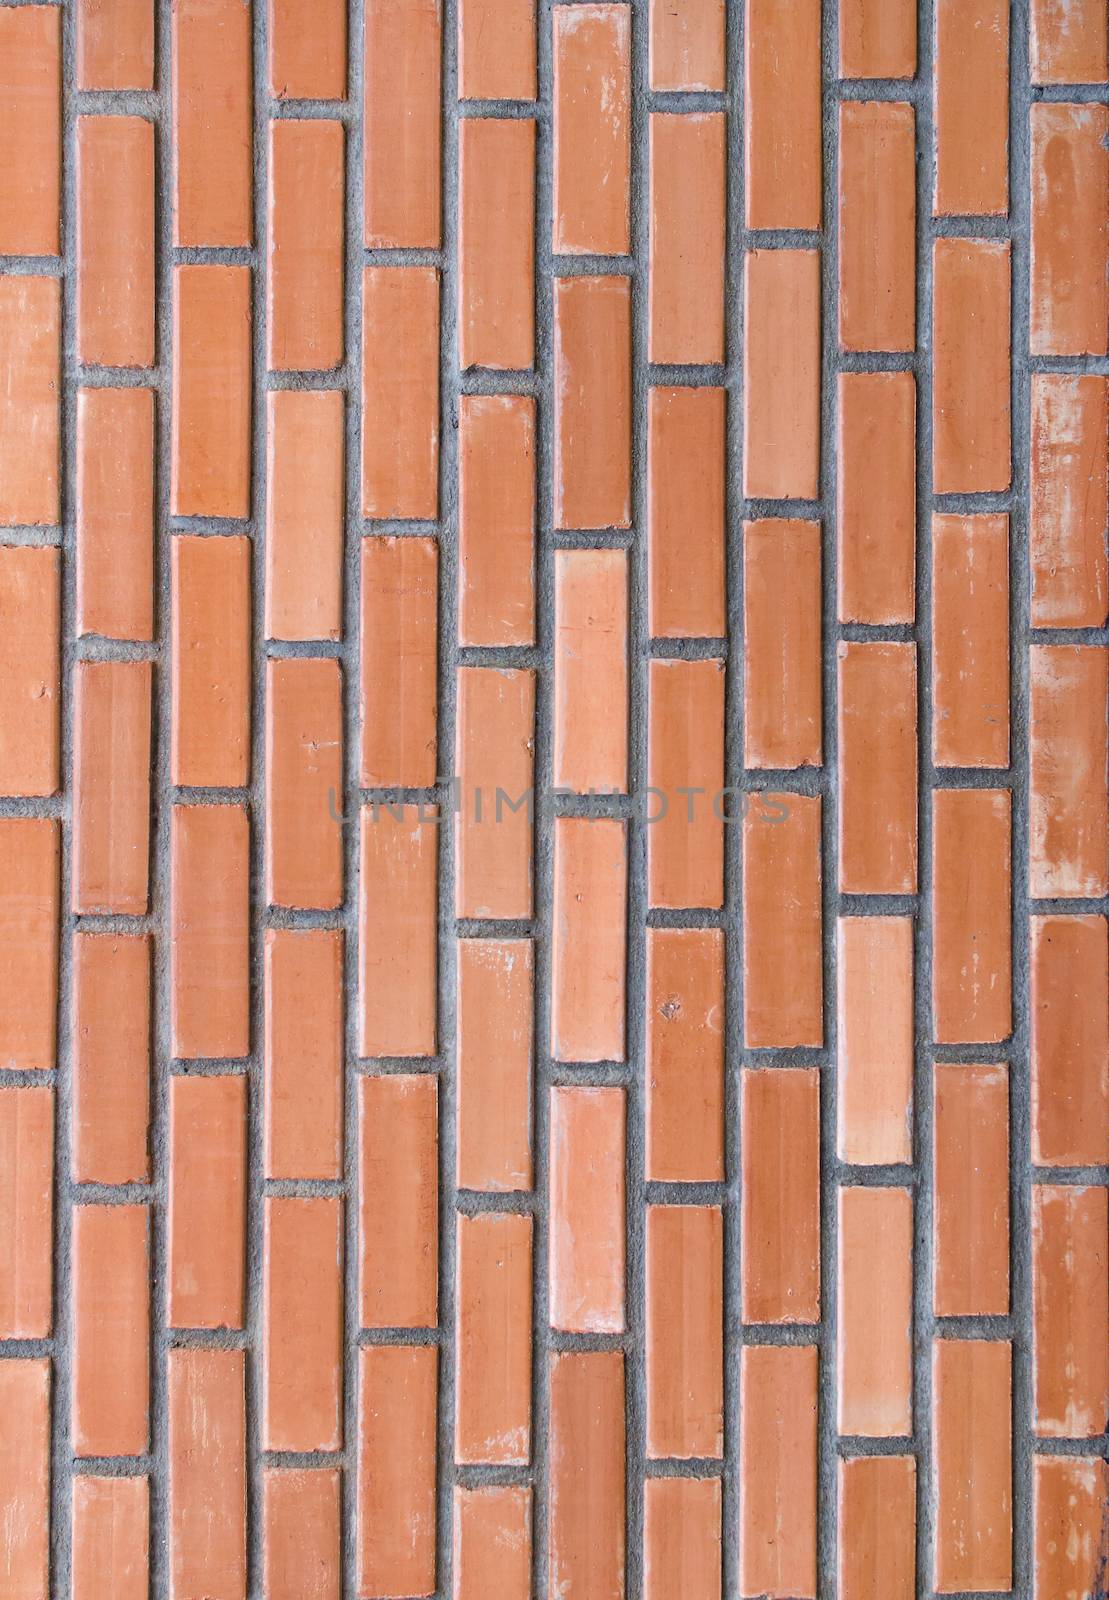 Background of art brick wall texture.